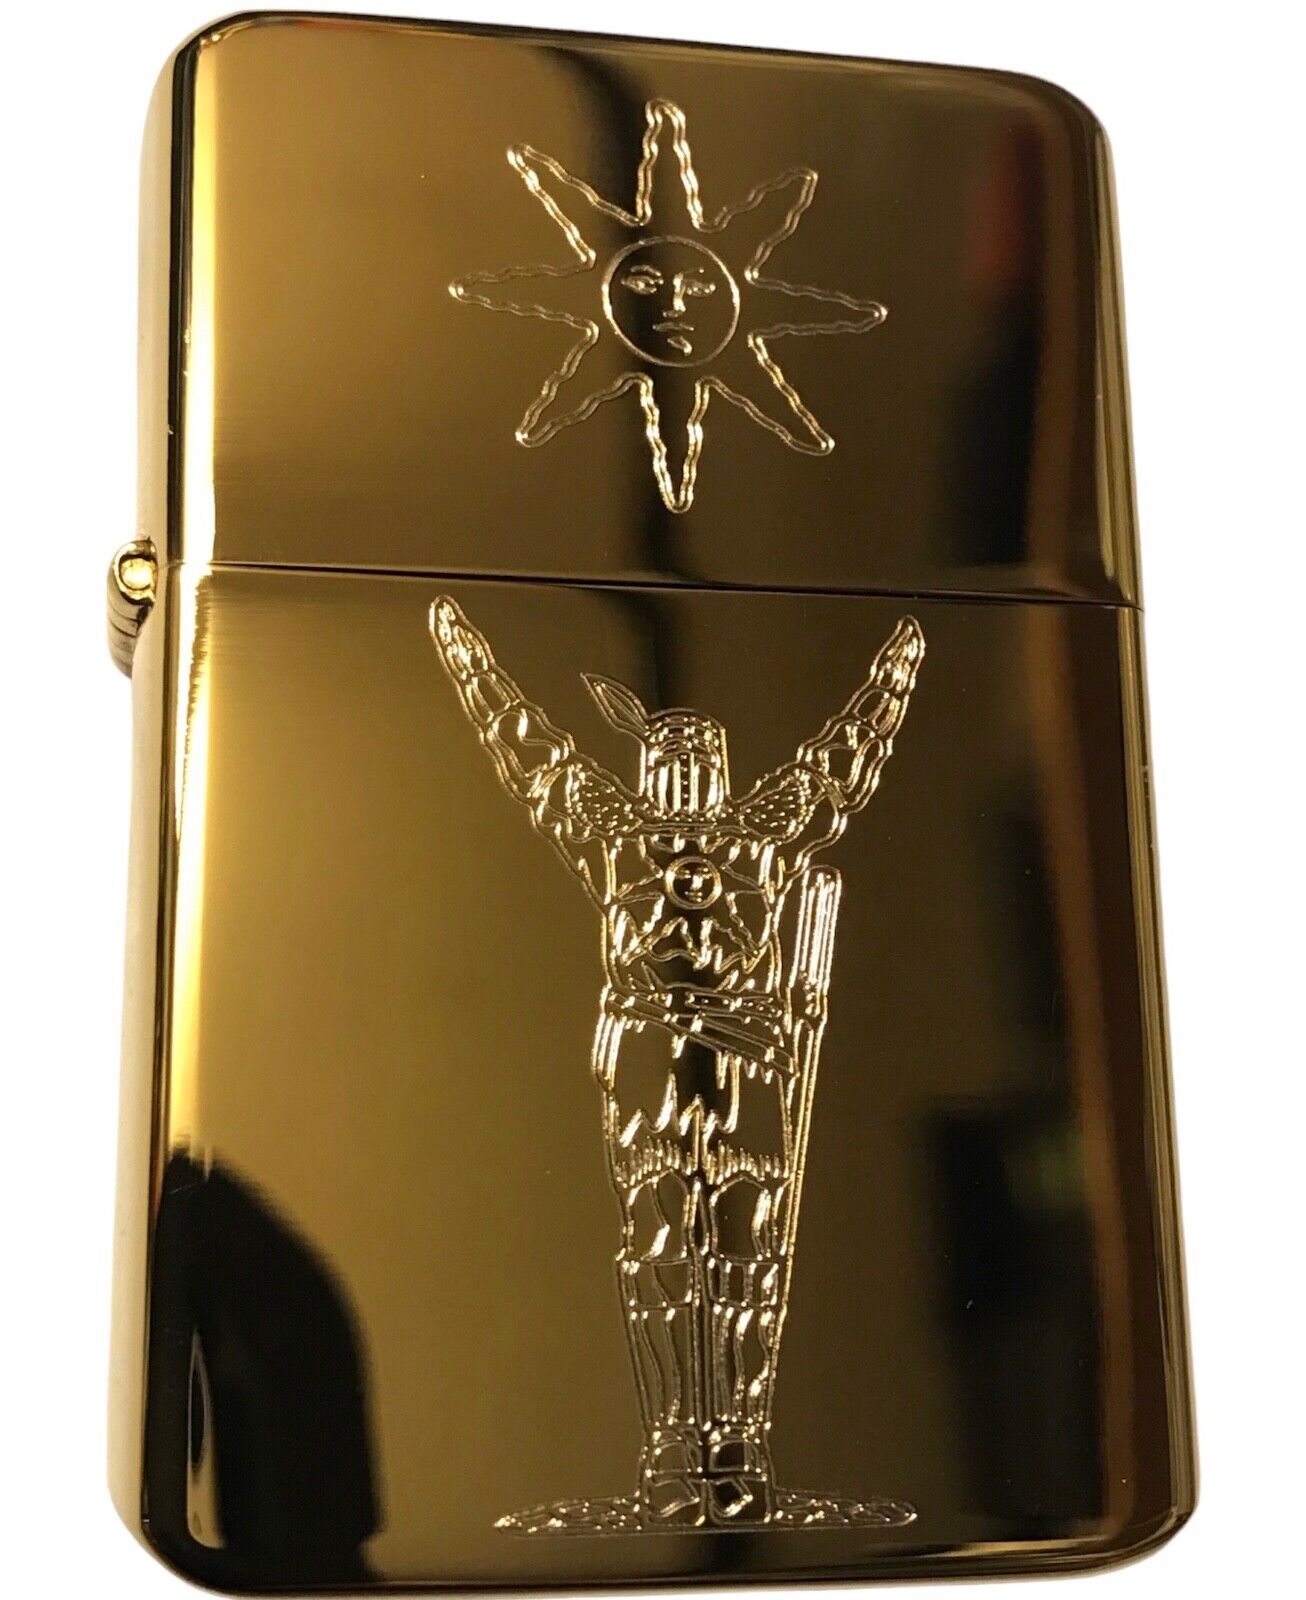 Dark Souls PRAISE THE SUN Solaire Lighter Polished Gold finish *FREE ENGRAVING*